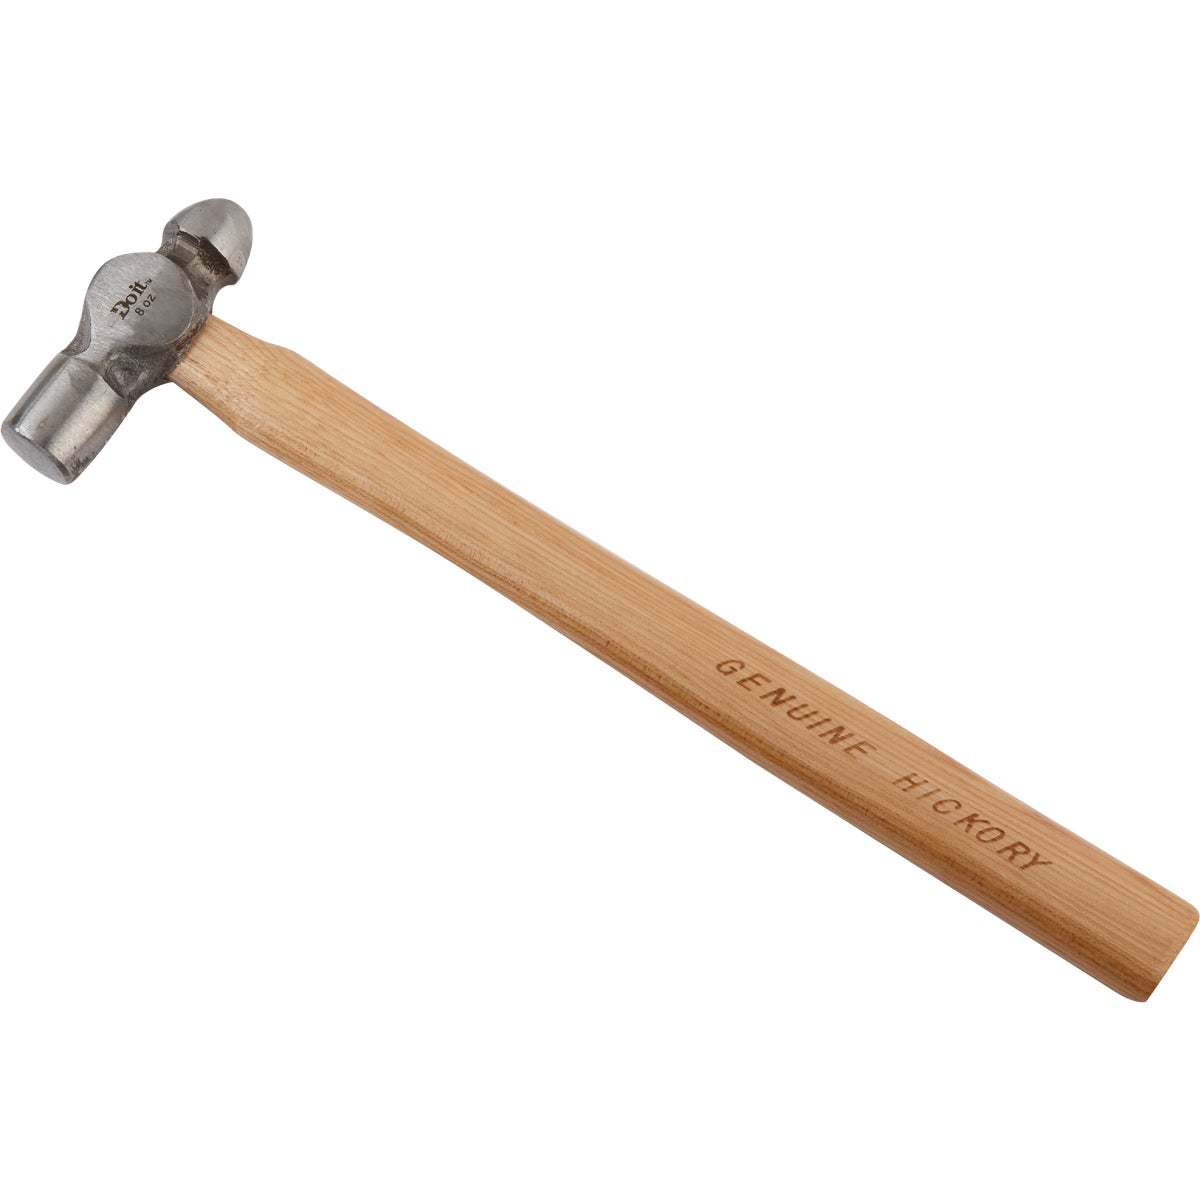 Item 357901, This ball peen hammer is features a durable forged steel head with polished